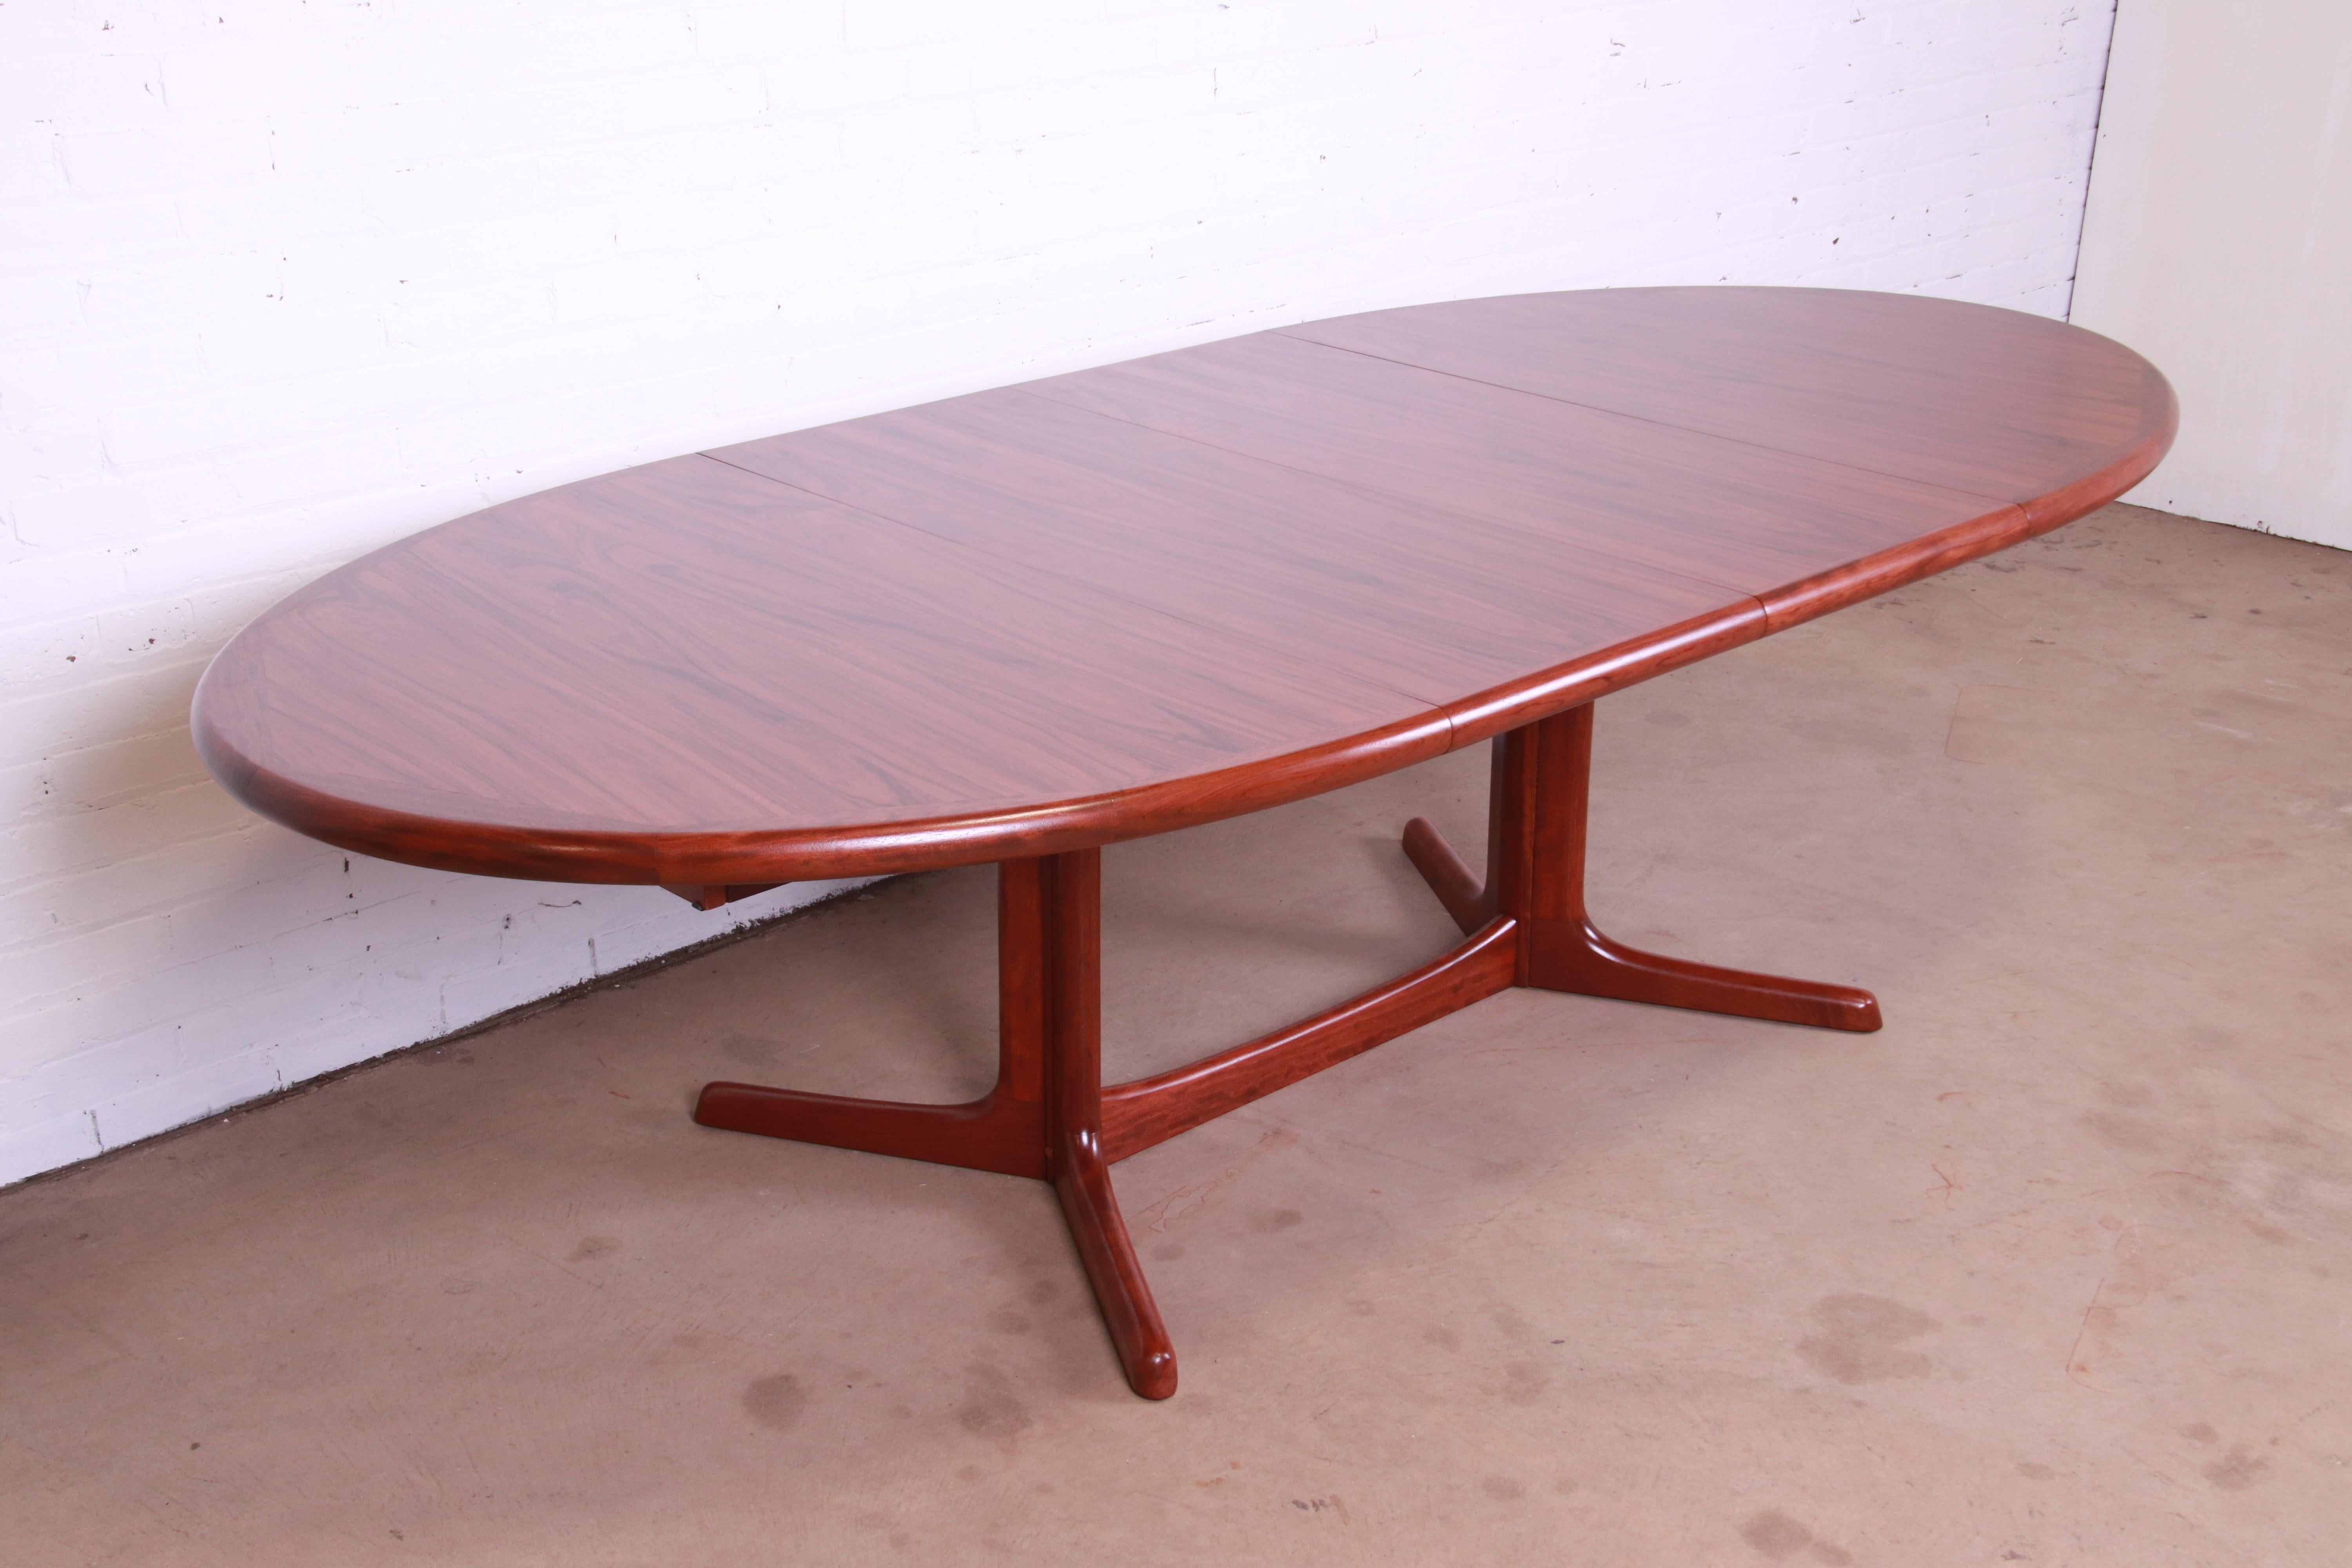 20th Century Dyrlund Danish Modern Rosewood Pedestal Extension Dining Table, Newly Refinished